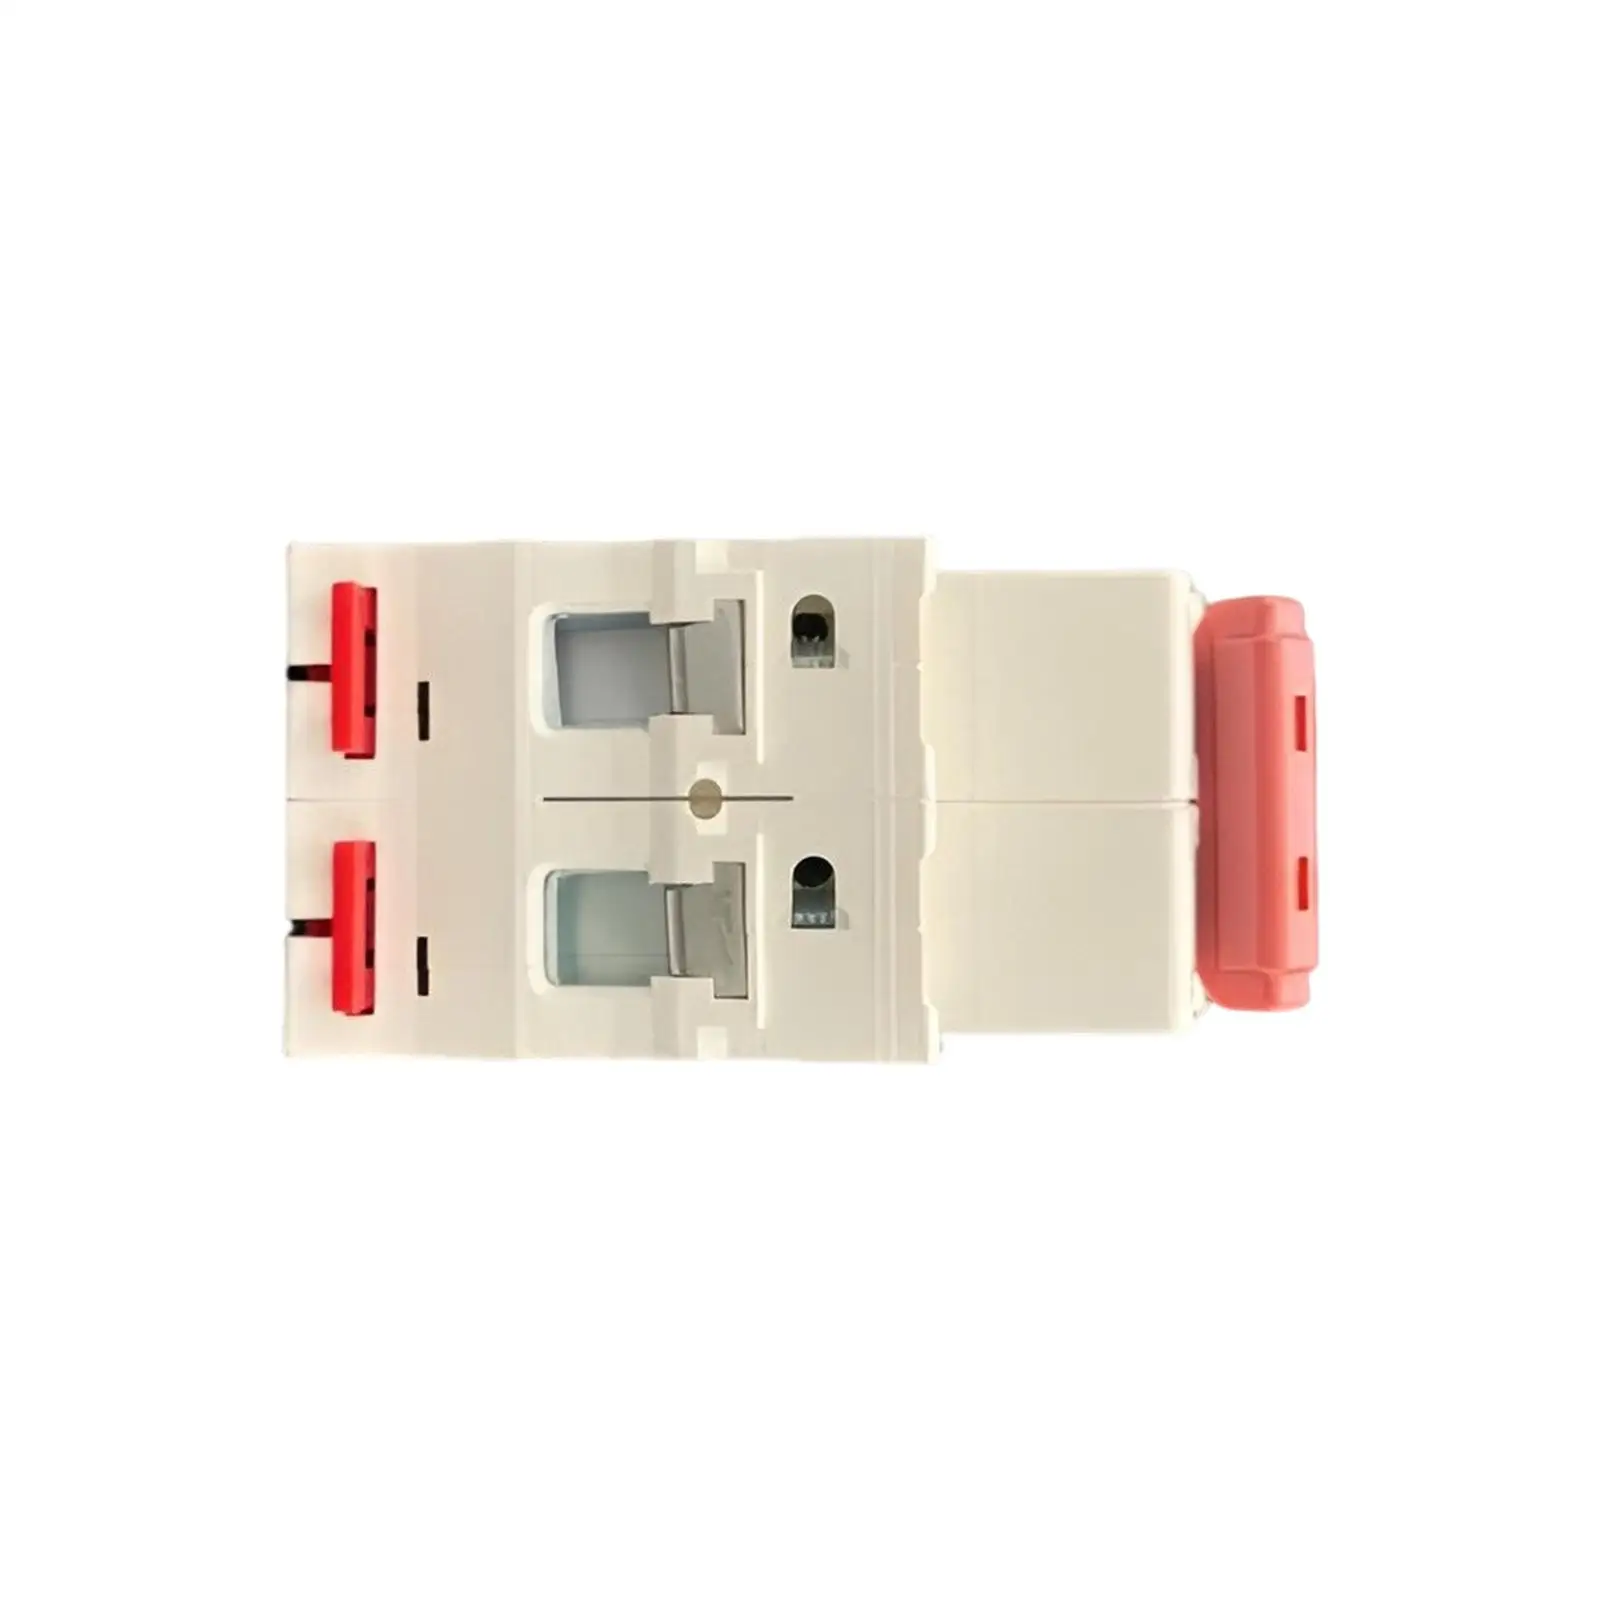 2P DC 1000V 63A Miniature Circuit Breaker 2P Solar Photovoltaic System Isolator DC Disconnect Switch